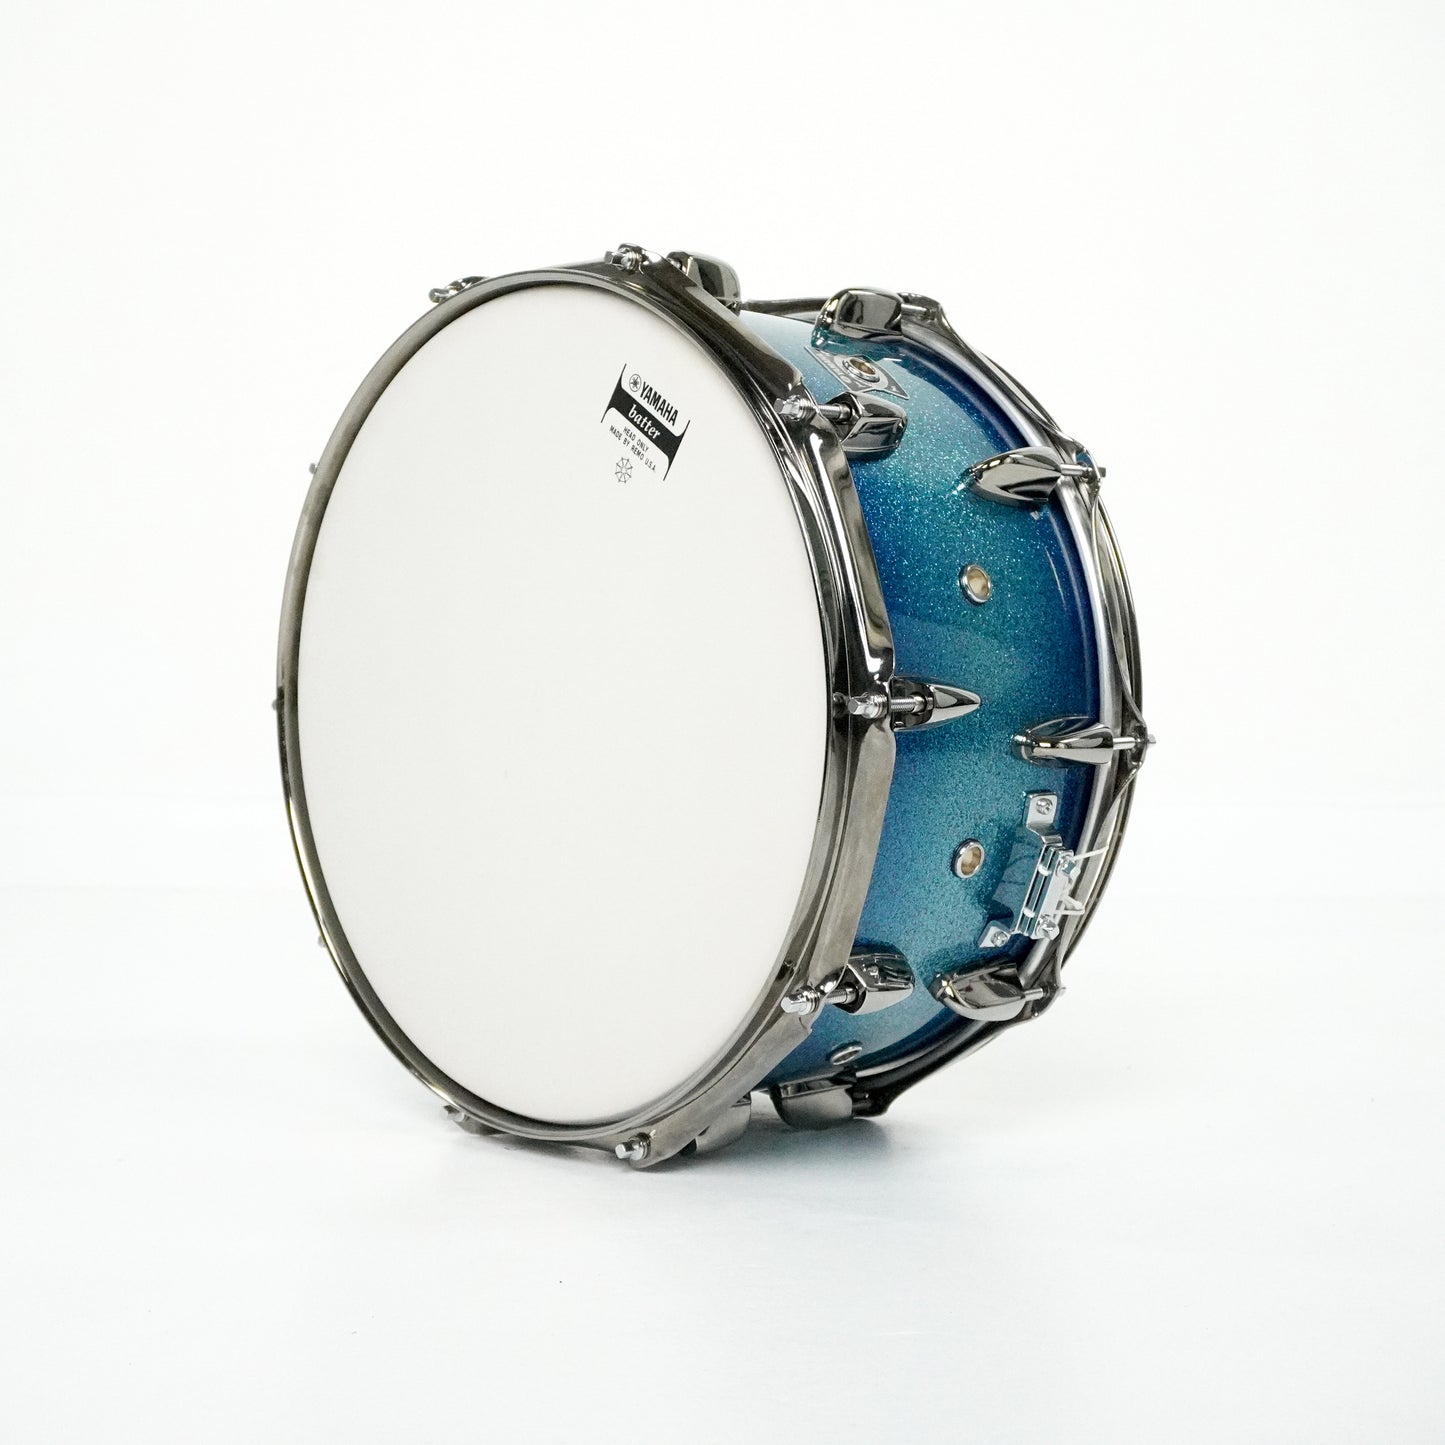 Yamaha 14' x 7" ‘Loud Series’ Snare Drum in Blue Sparkle